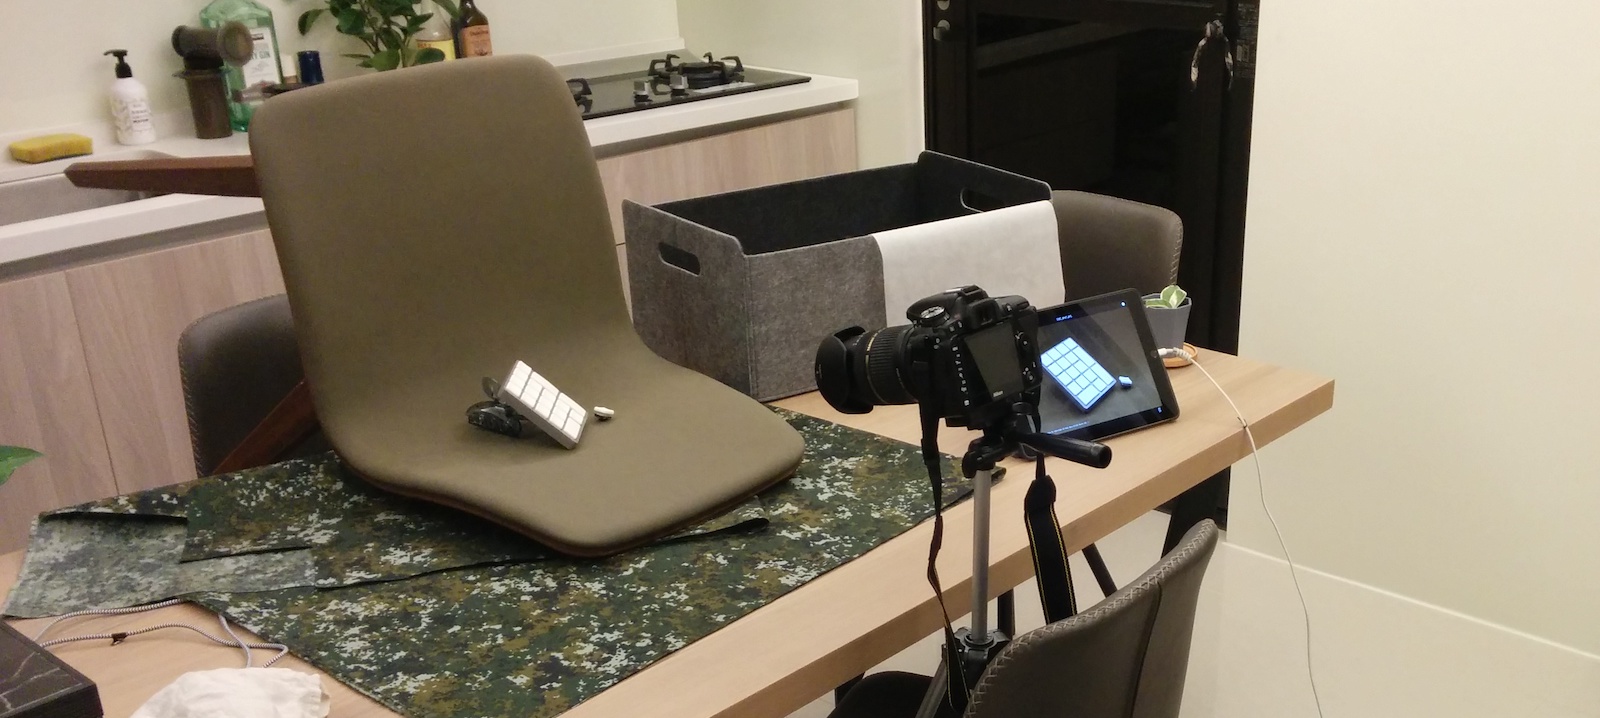 A keyboard being photographed in a chair on a kitchen table